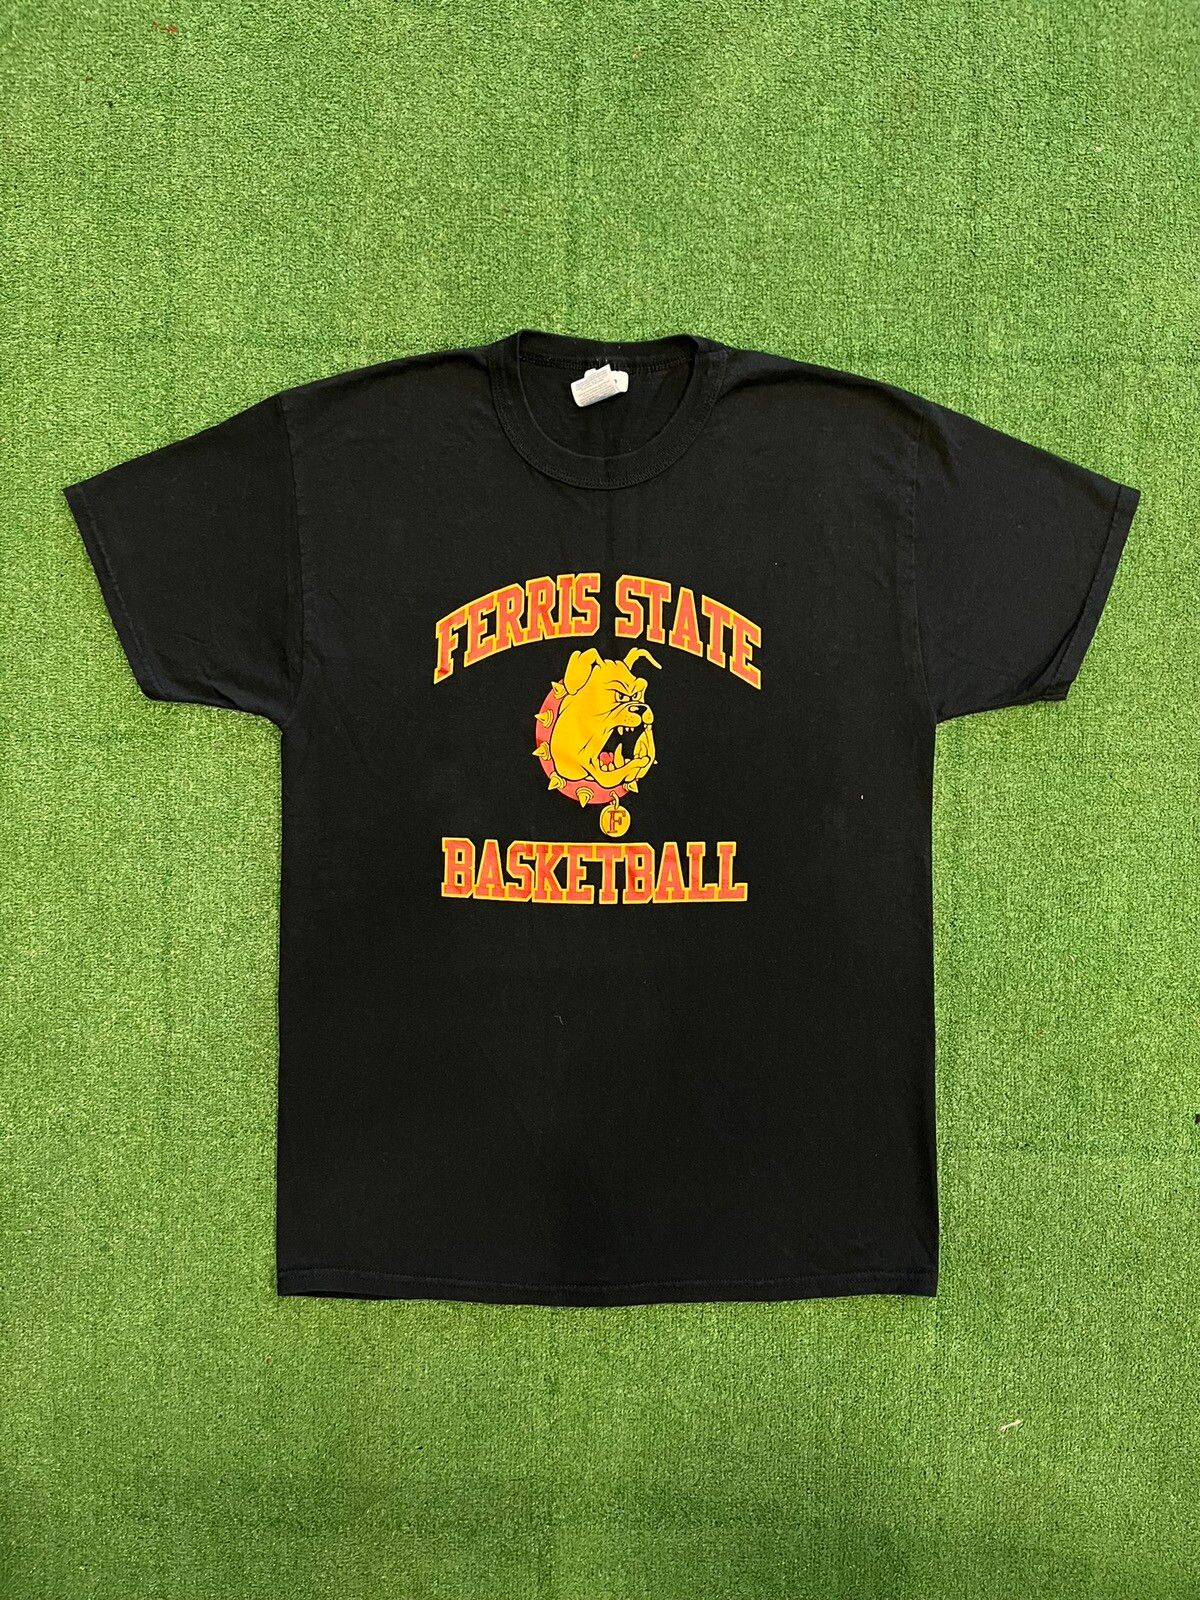 Pre-owned American College X Vintage Y2k Russel Athletic Ferris State Basketball T Shirt In Black